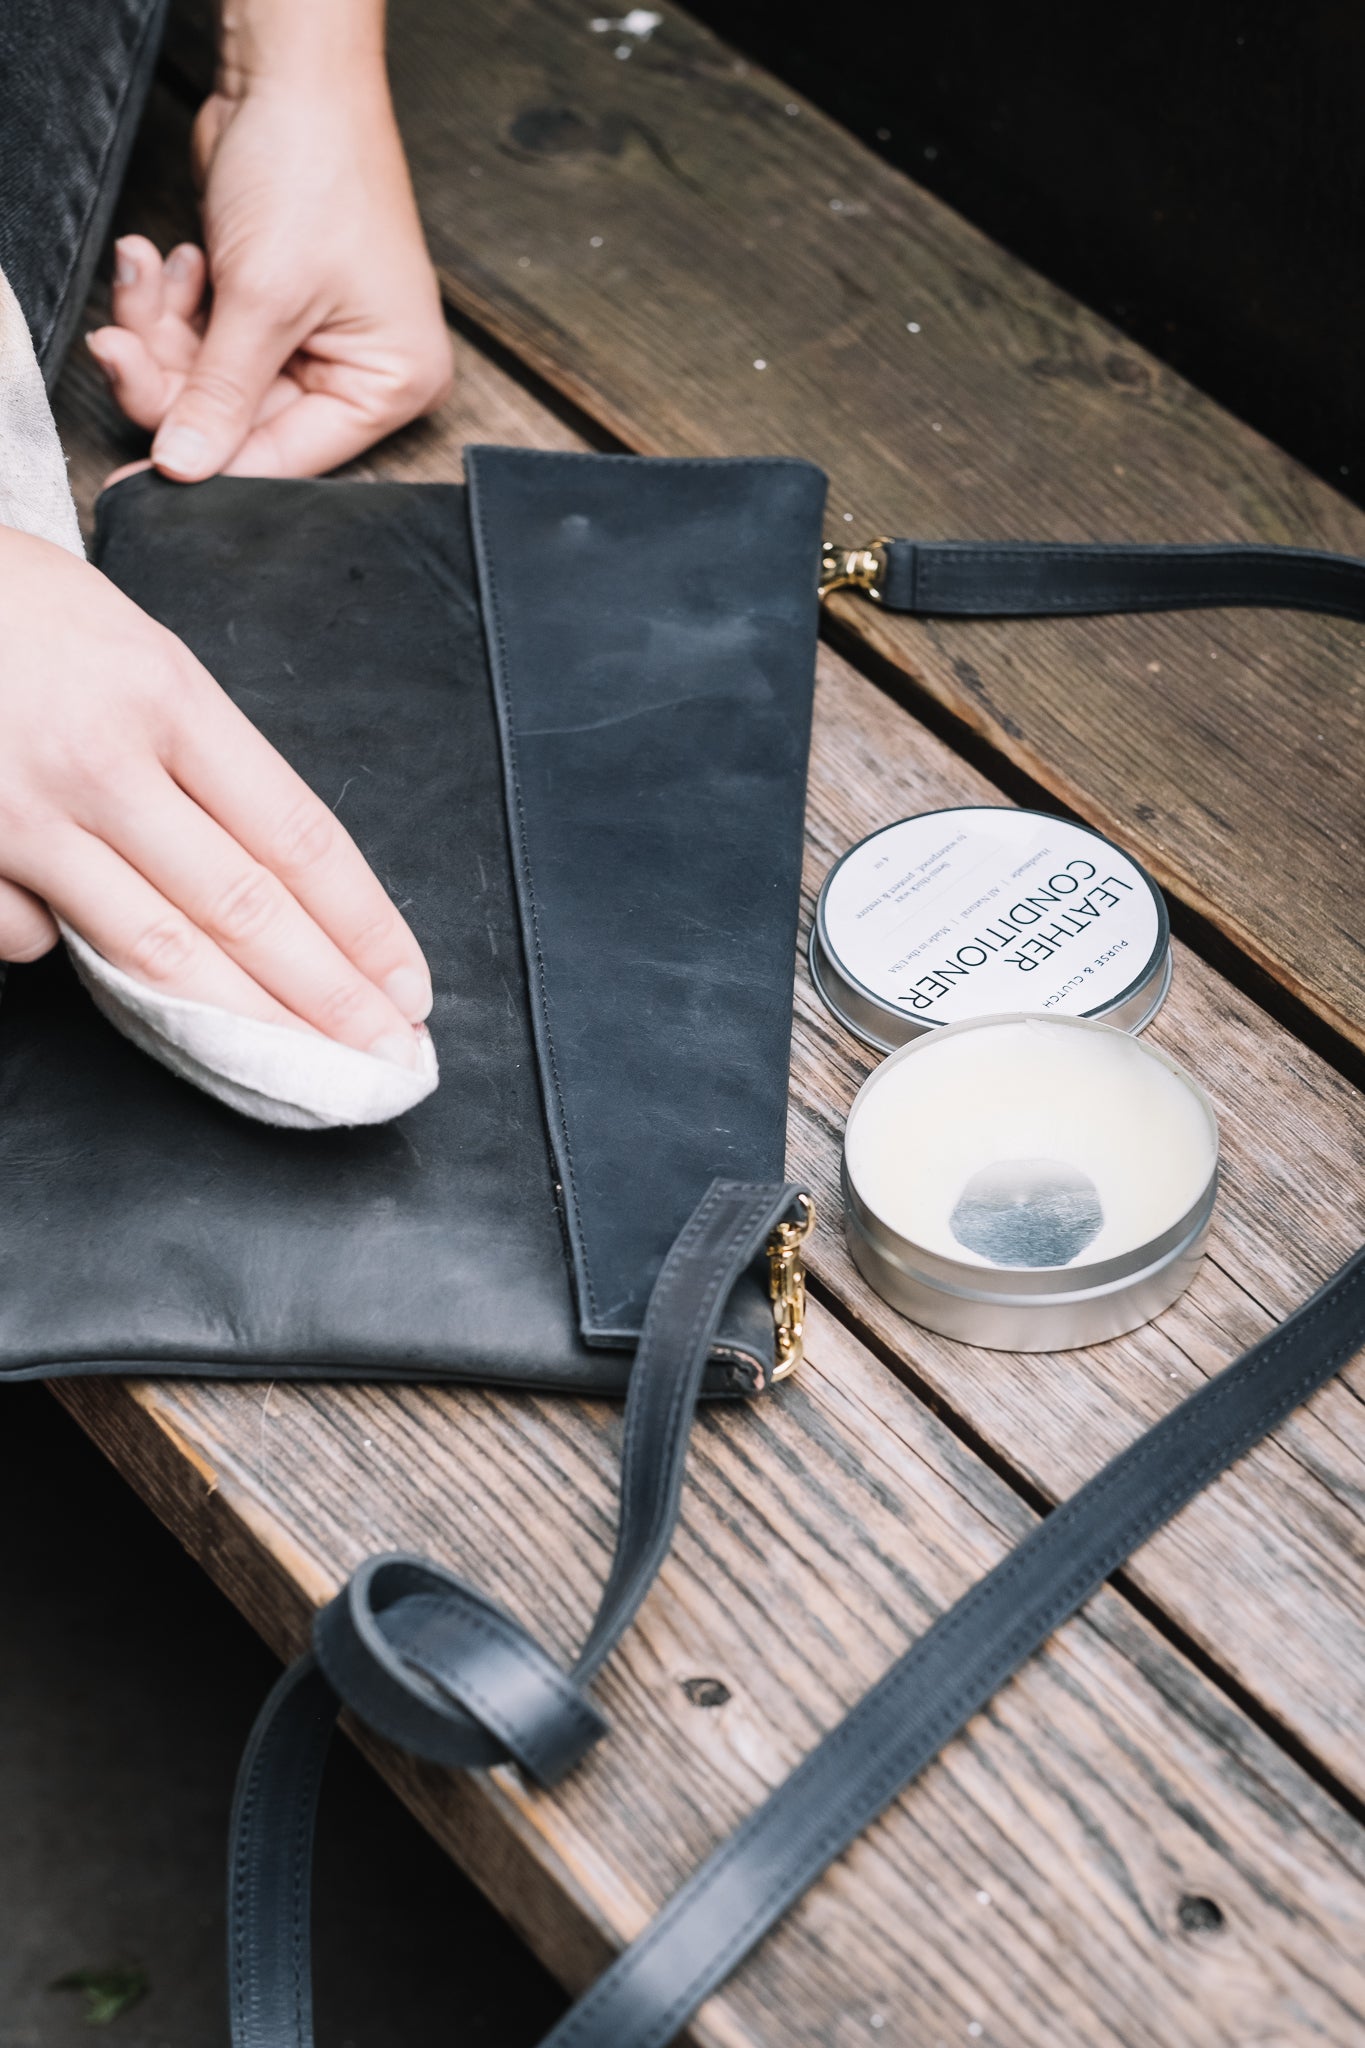 How to condition your leather handbags